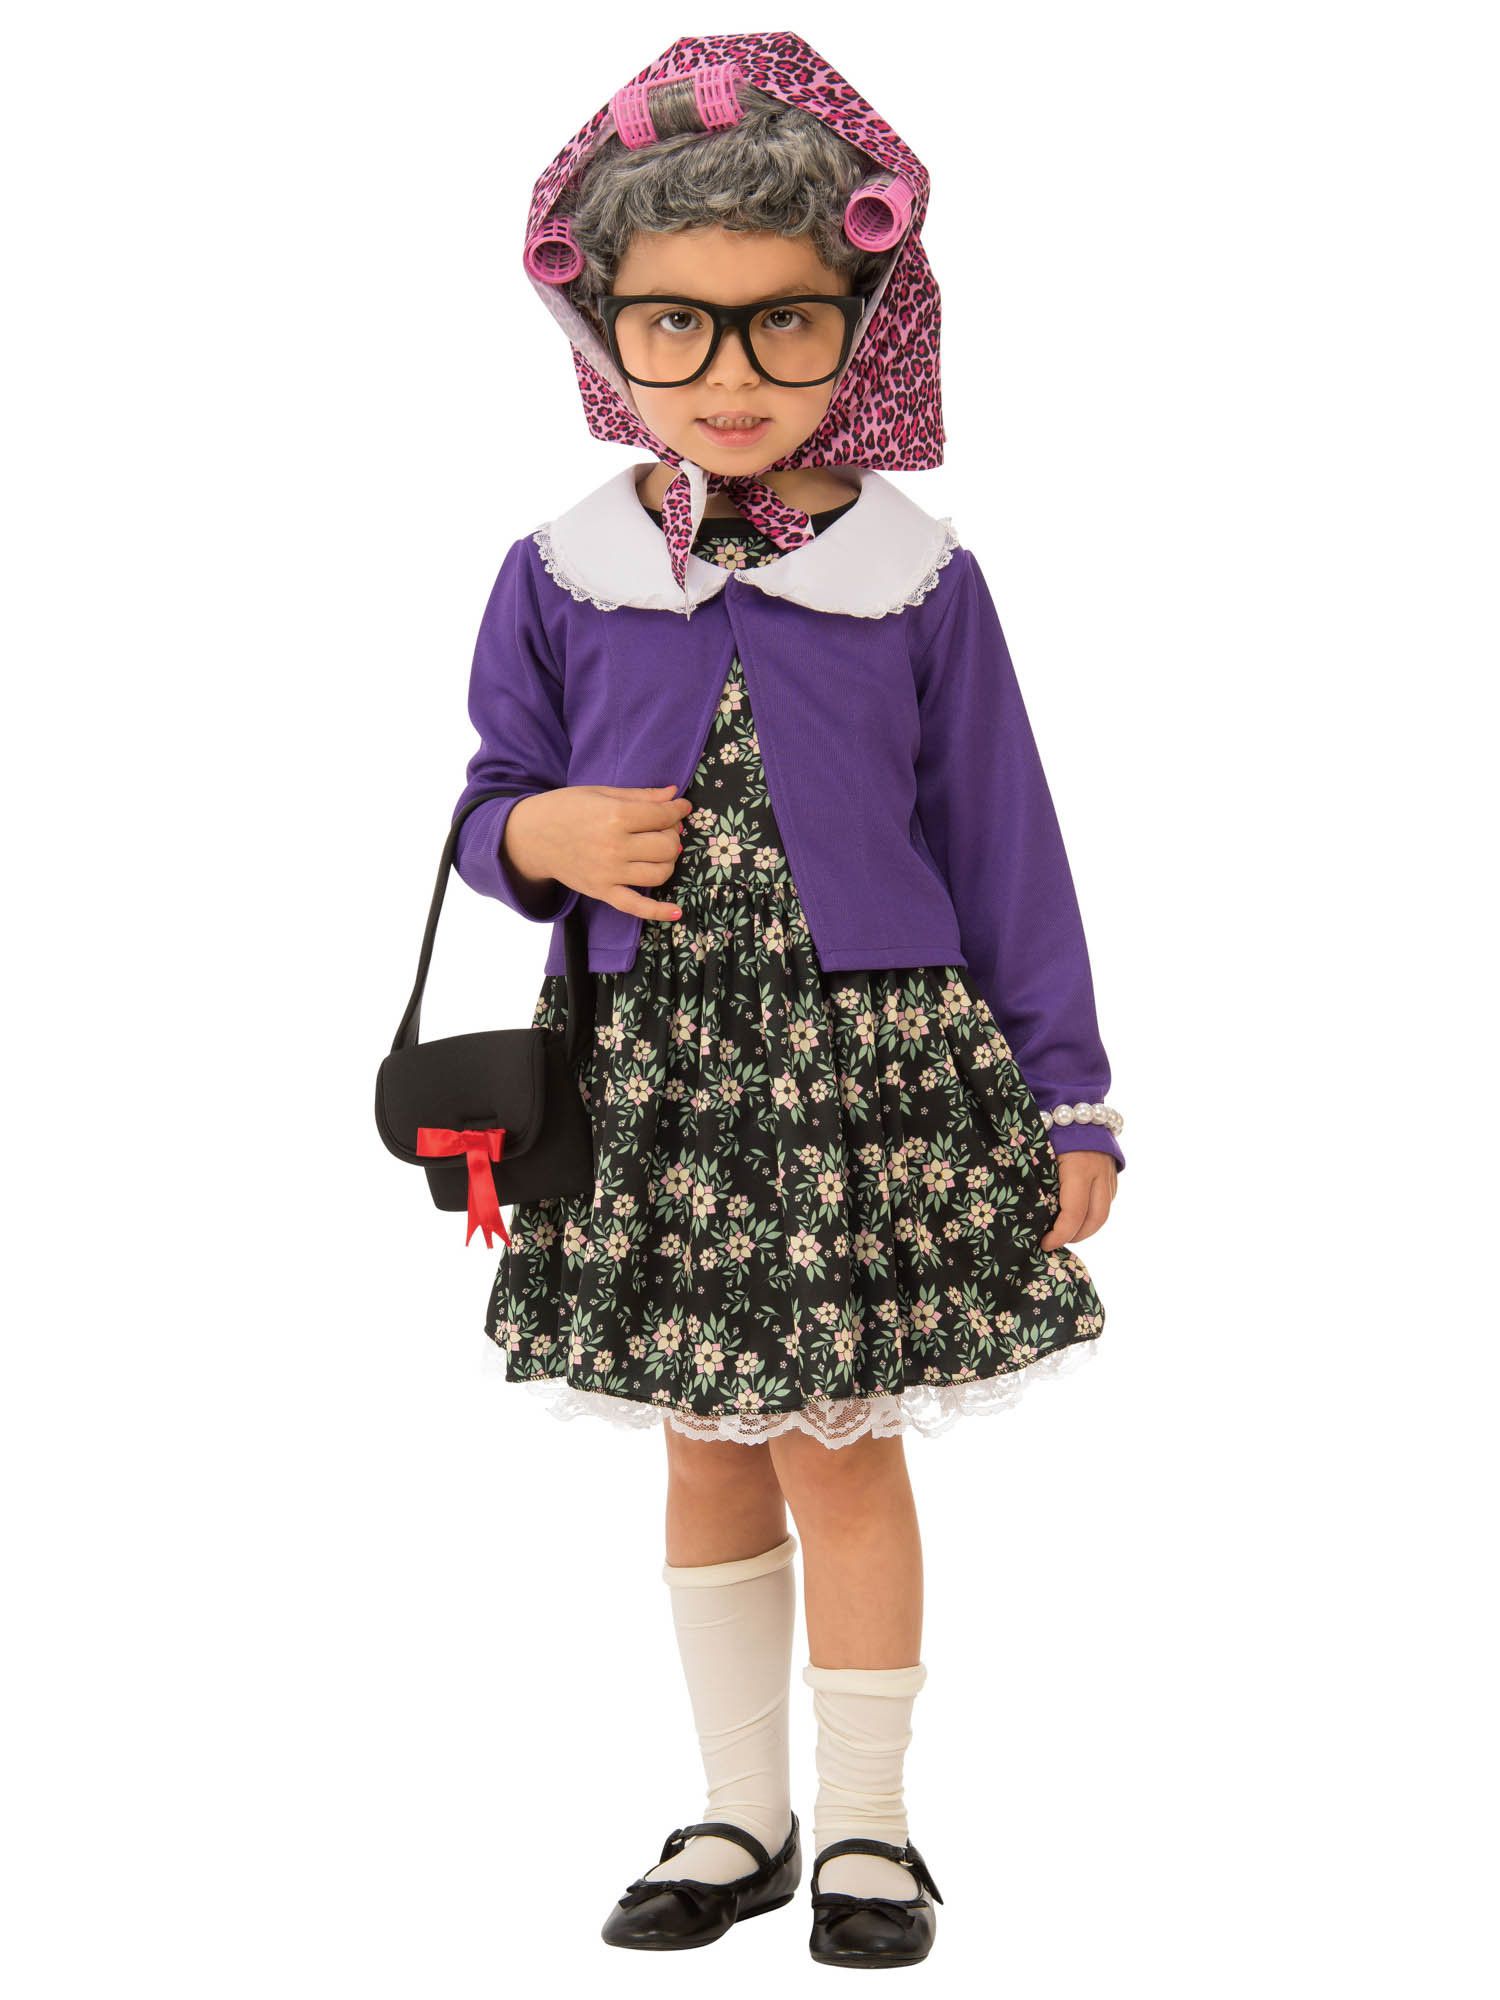 5.) Kids Little Old Lady Costume